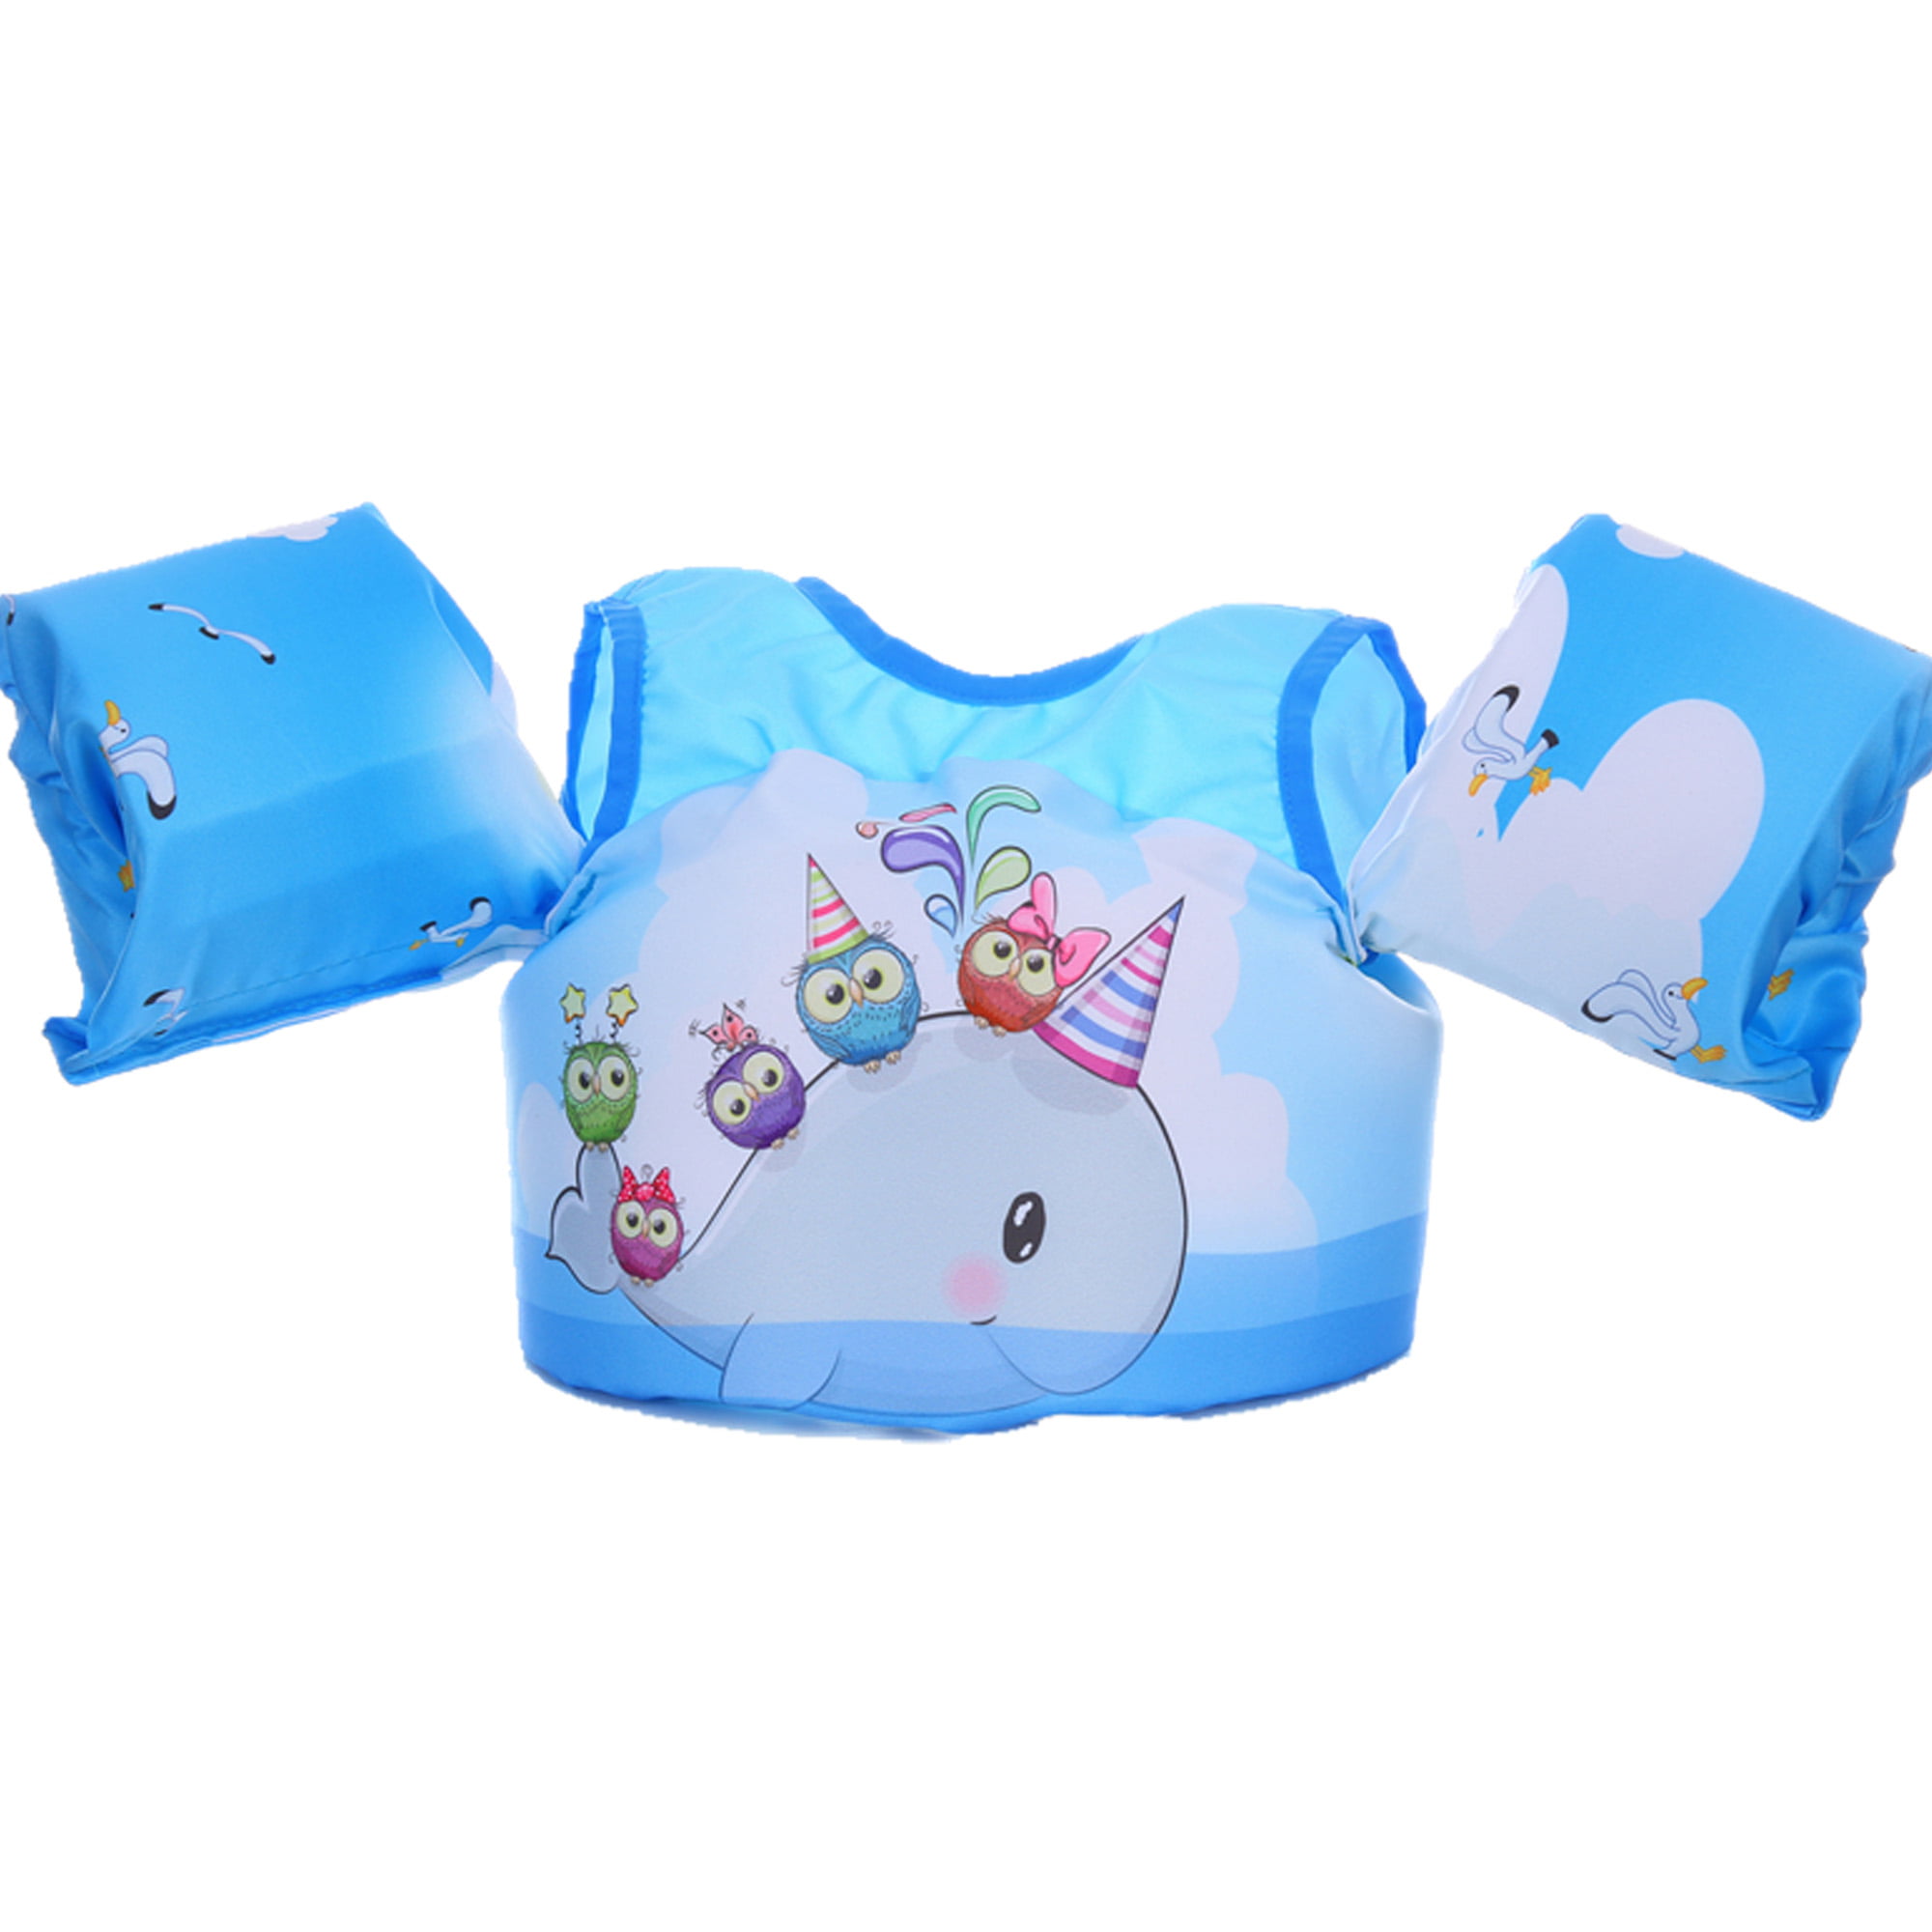 Hot Puddle Jumper Swimming Deluxe Cartoon Life Jacket safety Vest for Kids Baby 